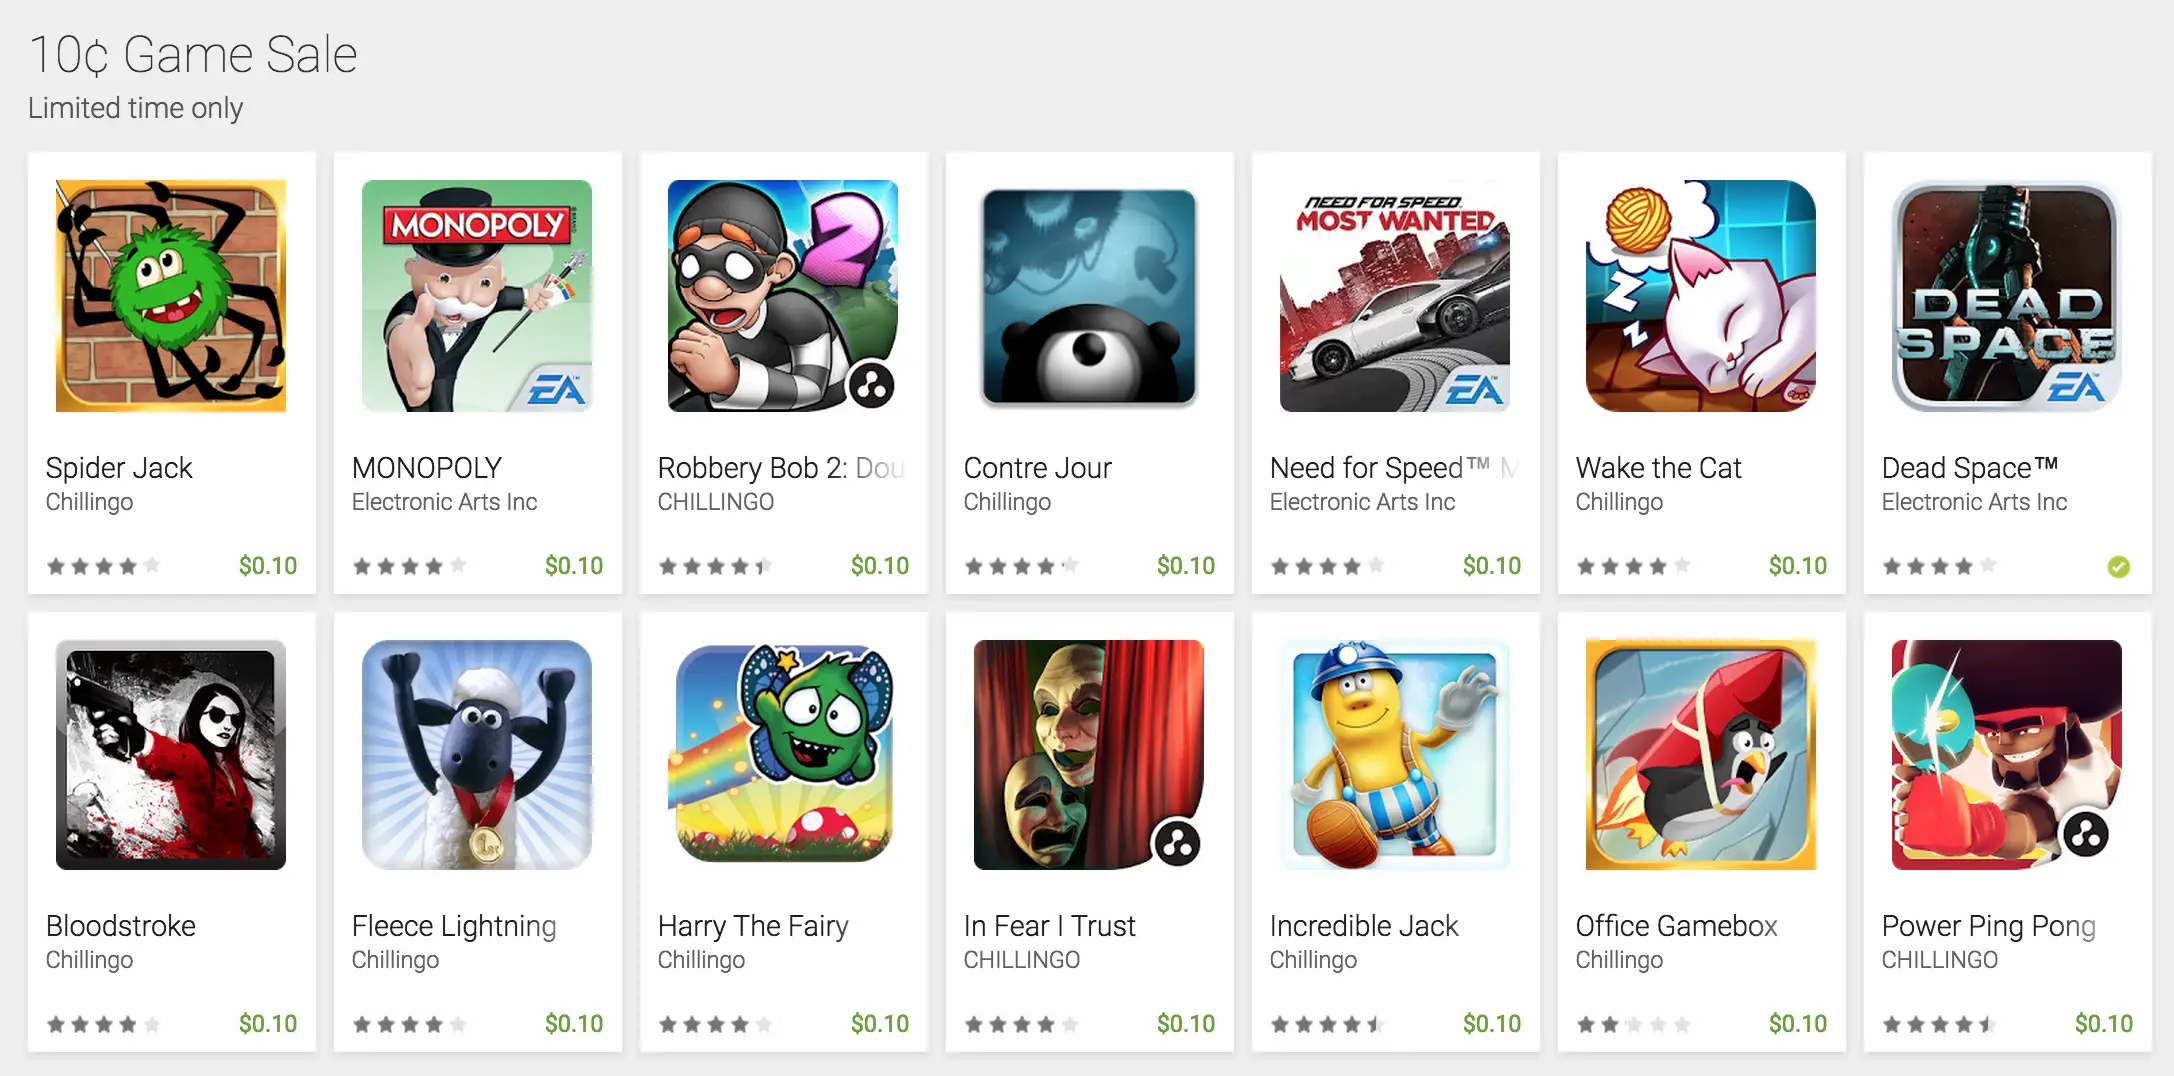 14 games marked down to $.10 cents as part of another crazy Google